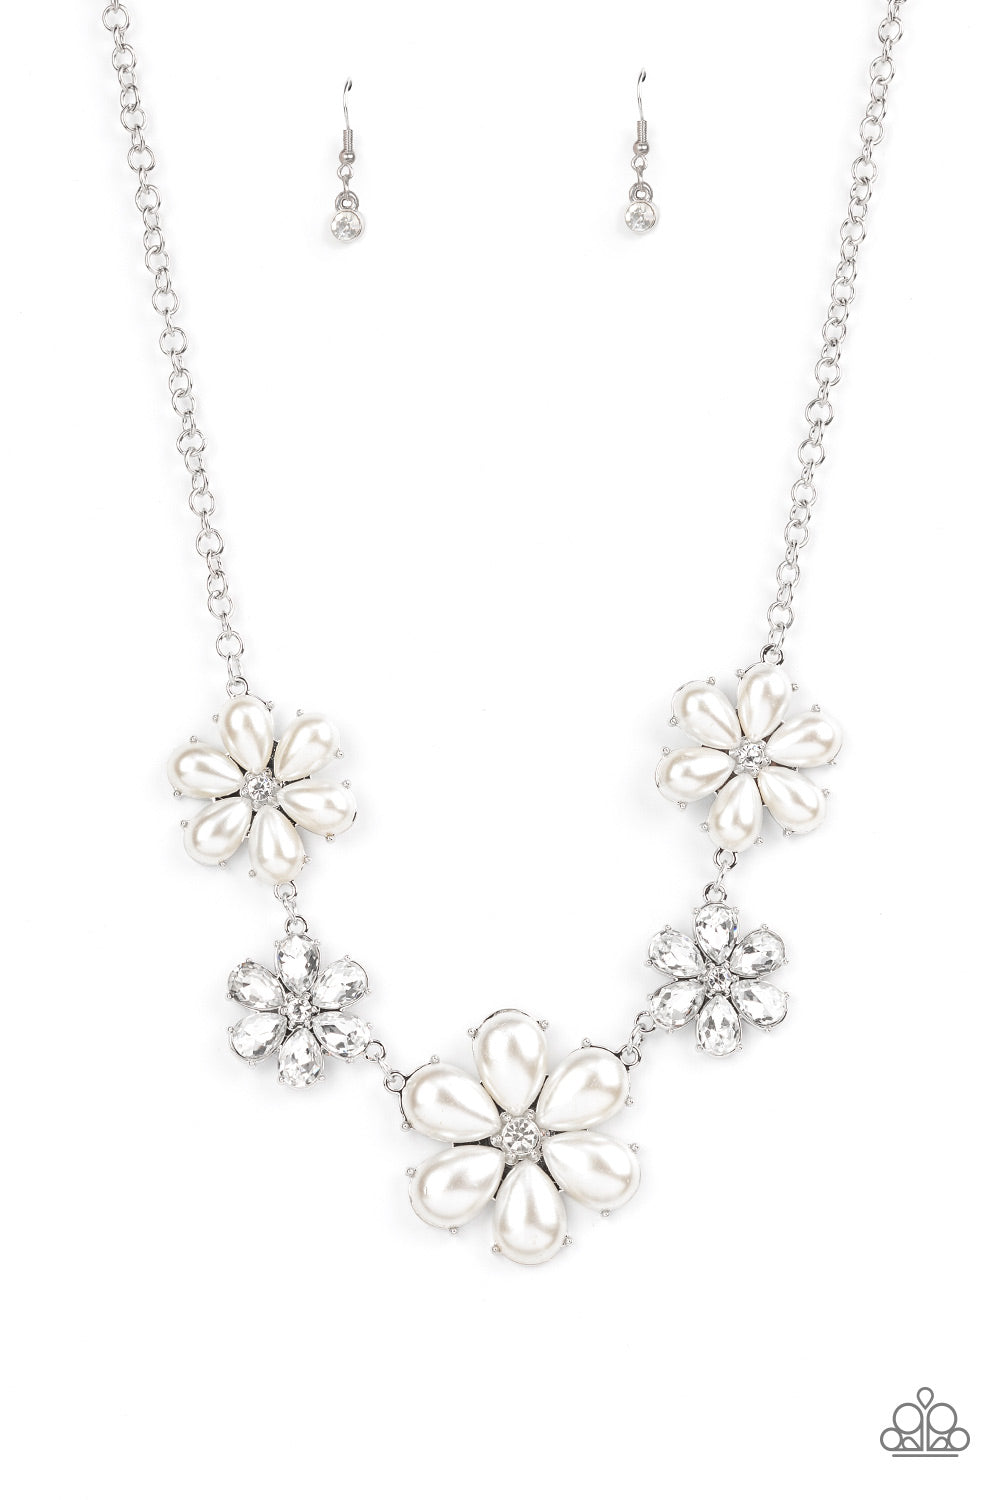 Paparazzi Life of the Party - Fiercely Flowering - White Necklace